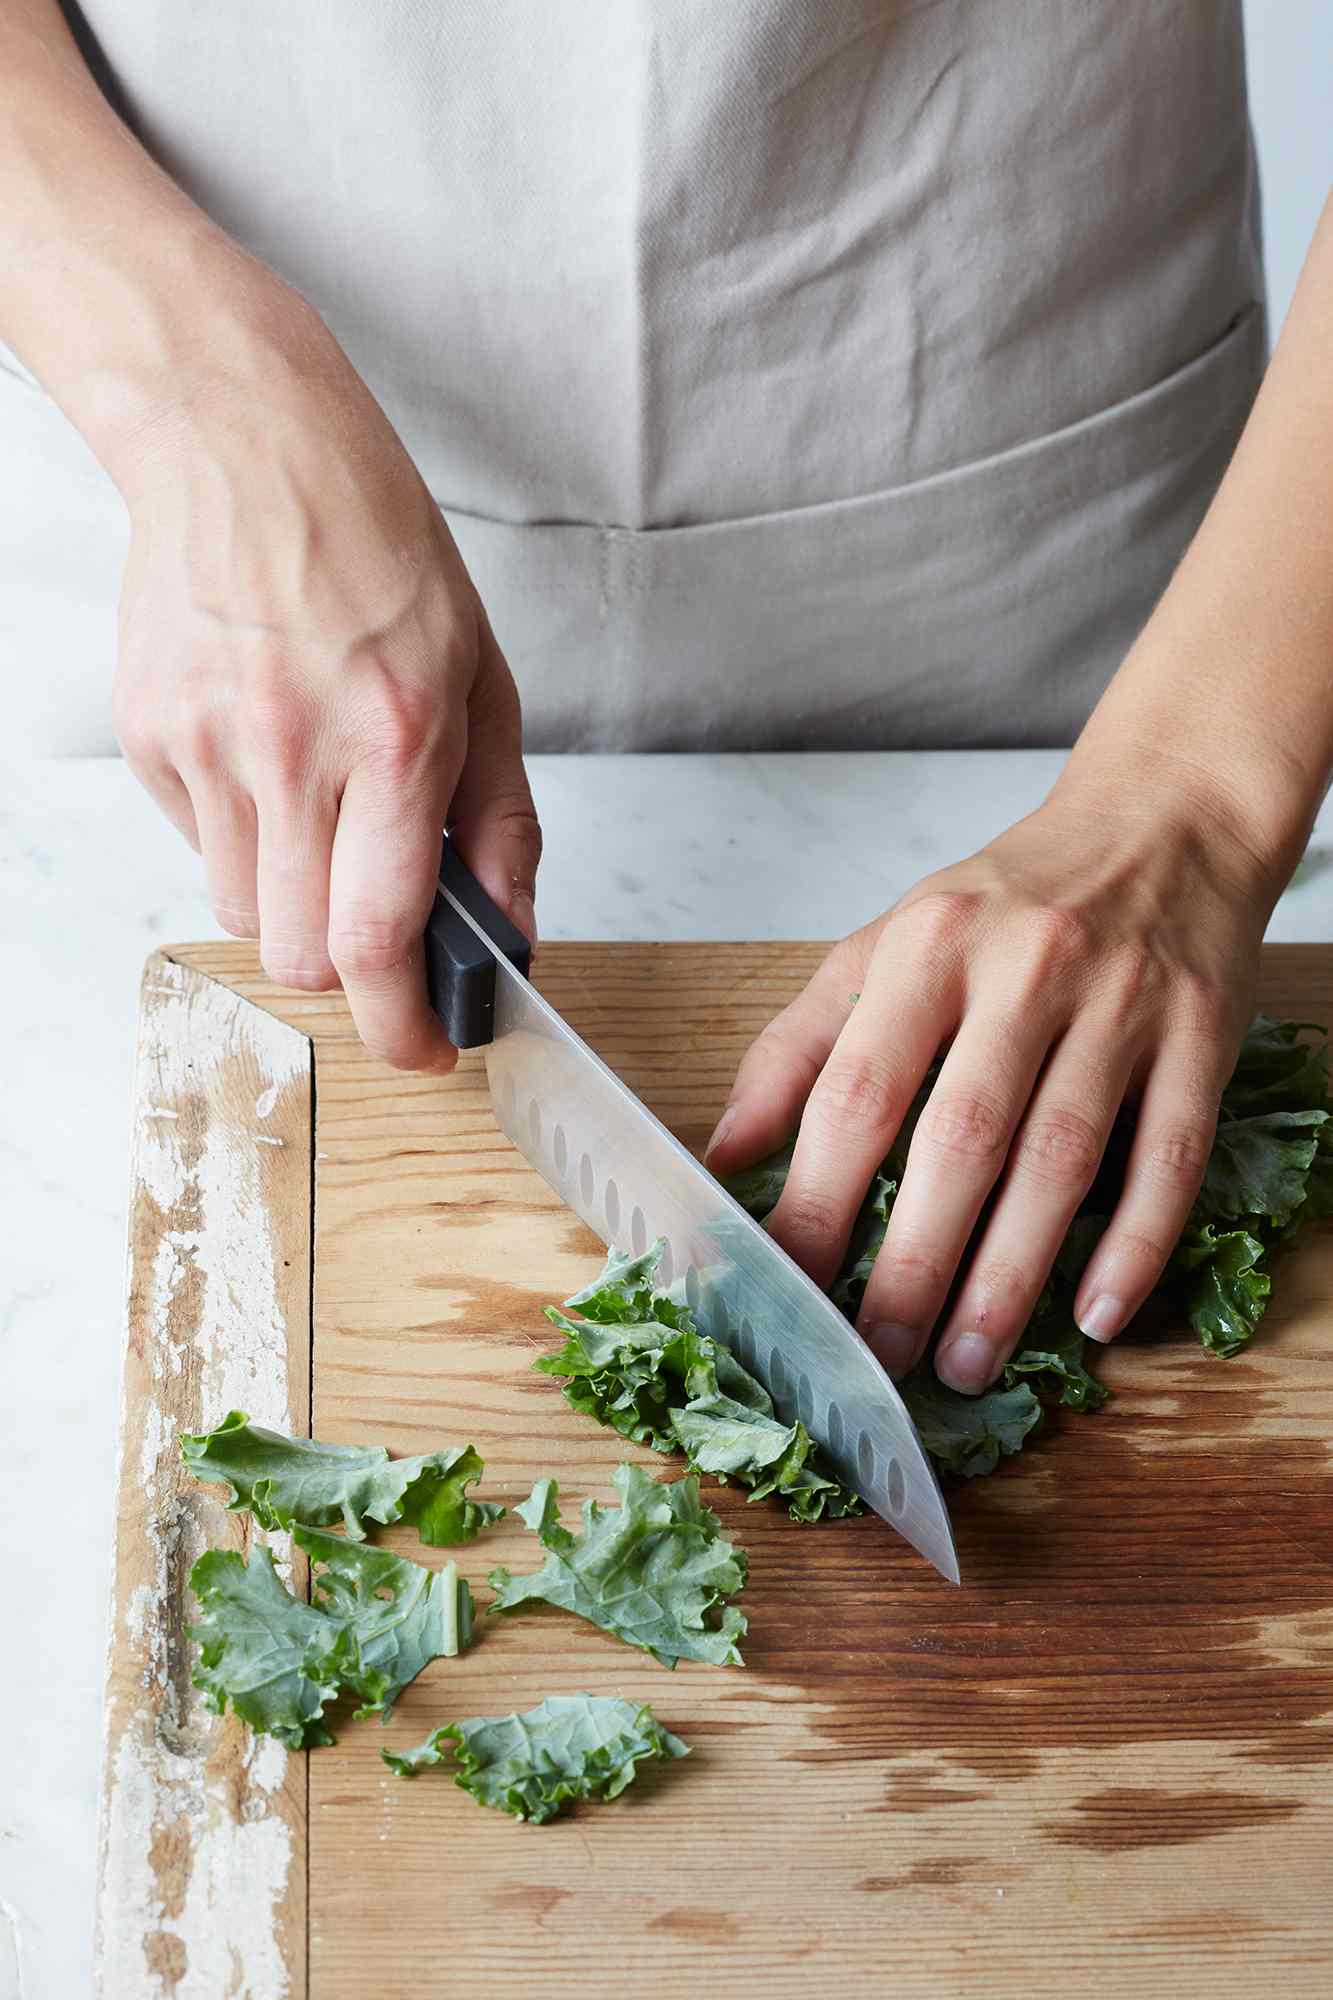 A close up of hands using a knife to cut kale on a cutting board